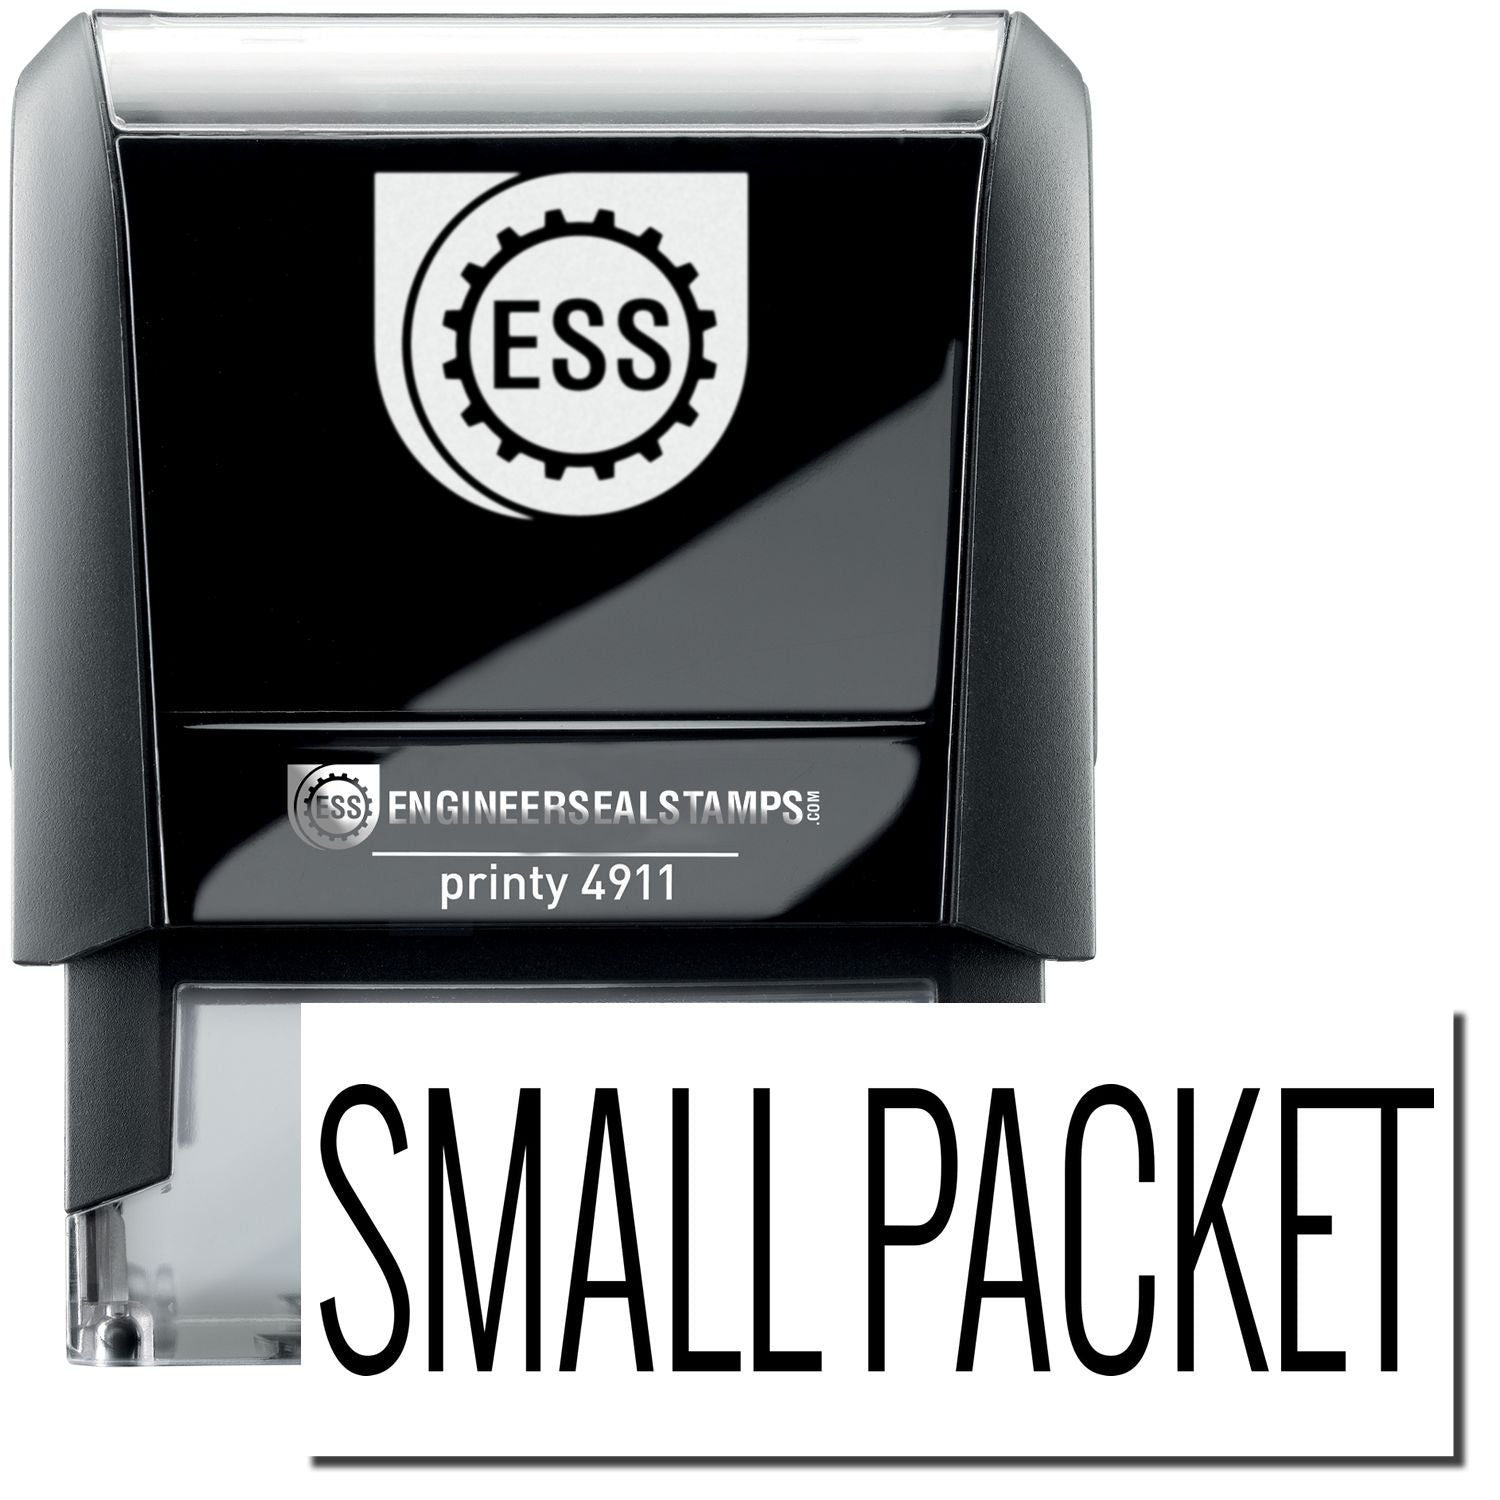 A self-inking stamp with a stamped image showing how the text "SMALL PACKET" is displayed after stamping.